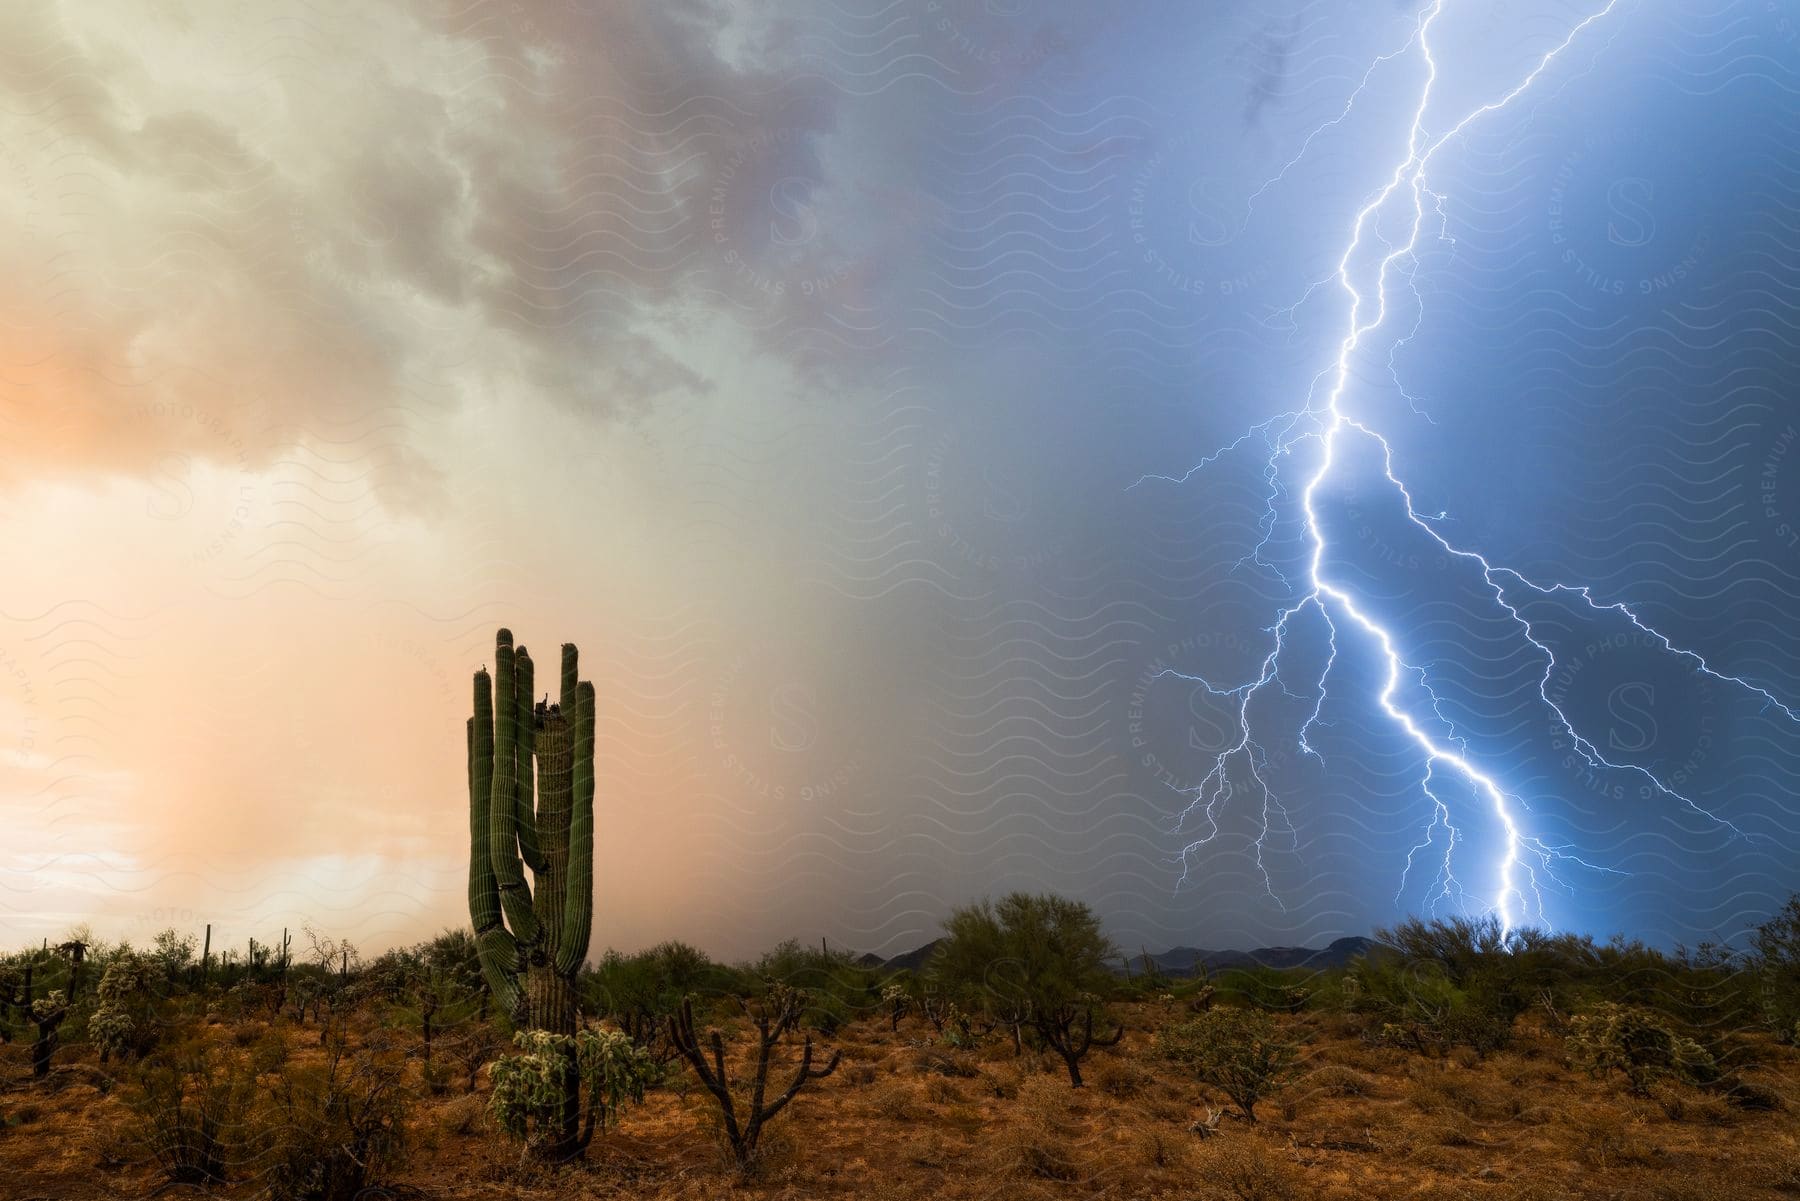 A desert thunderstorm with lightning to the right and a cactus in the foreground to the left